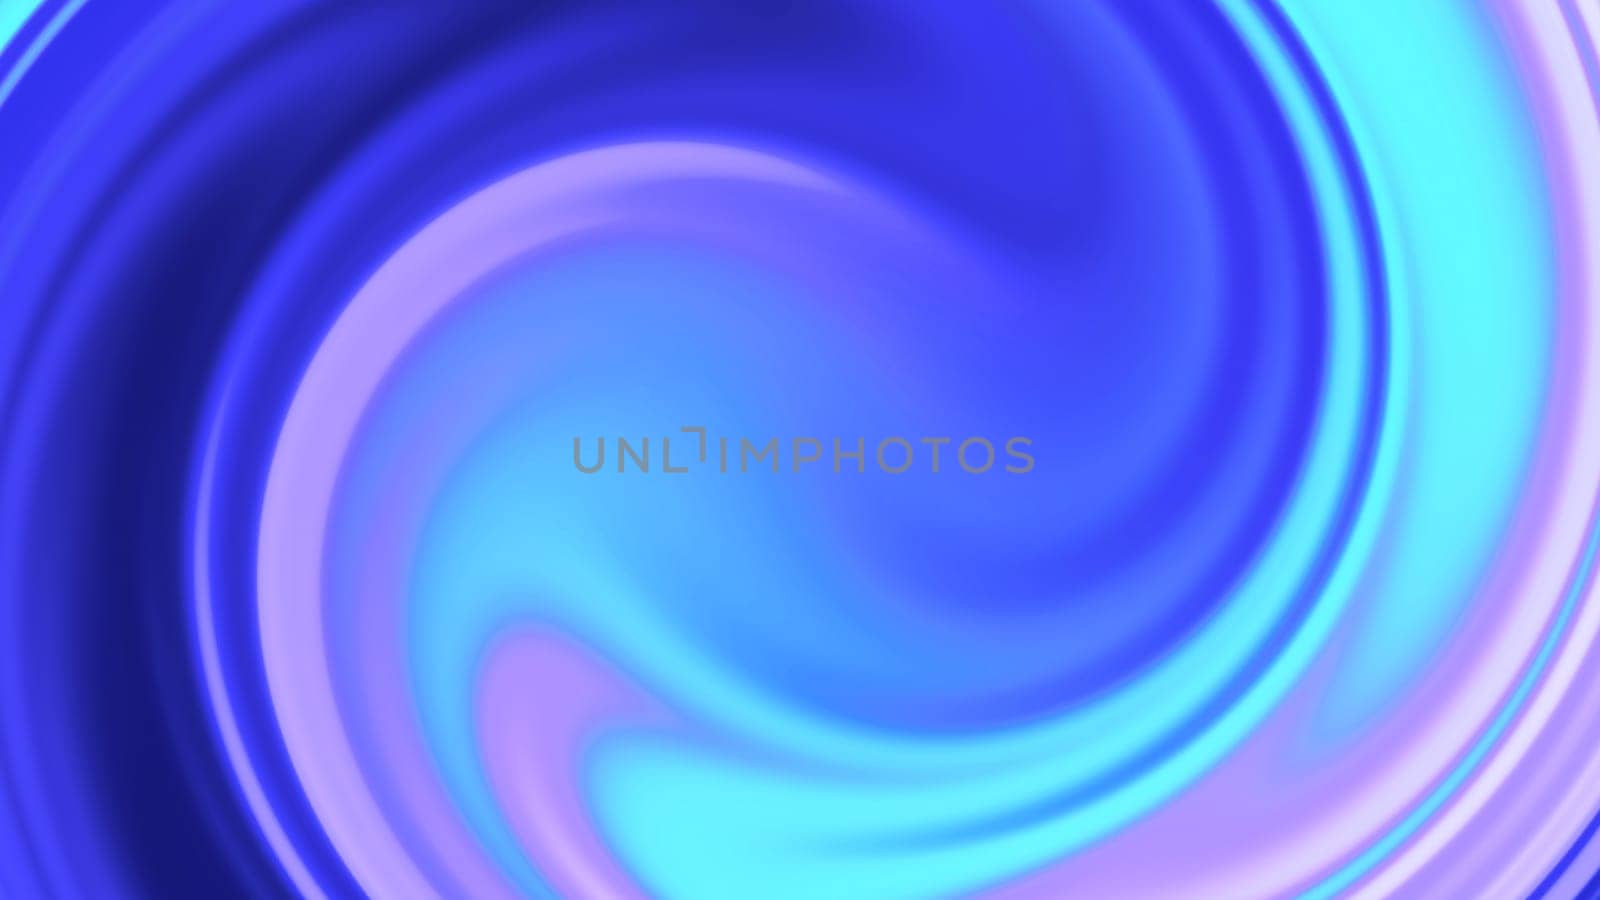 Abstract fluid iridescent holographic neon. Gradient design element for backgrounds, banners, wallpapers, posters and covers.